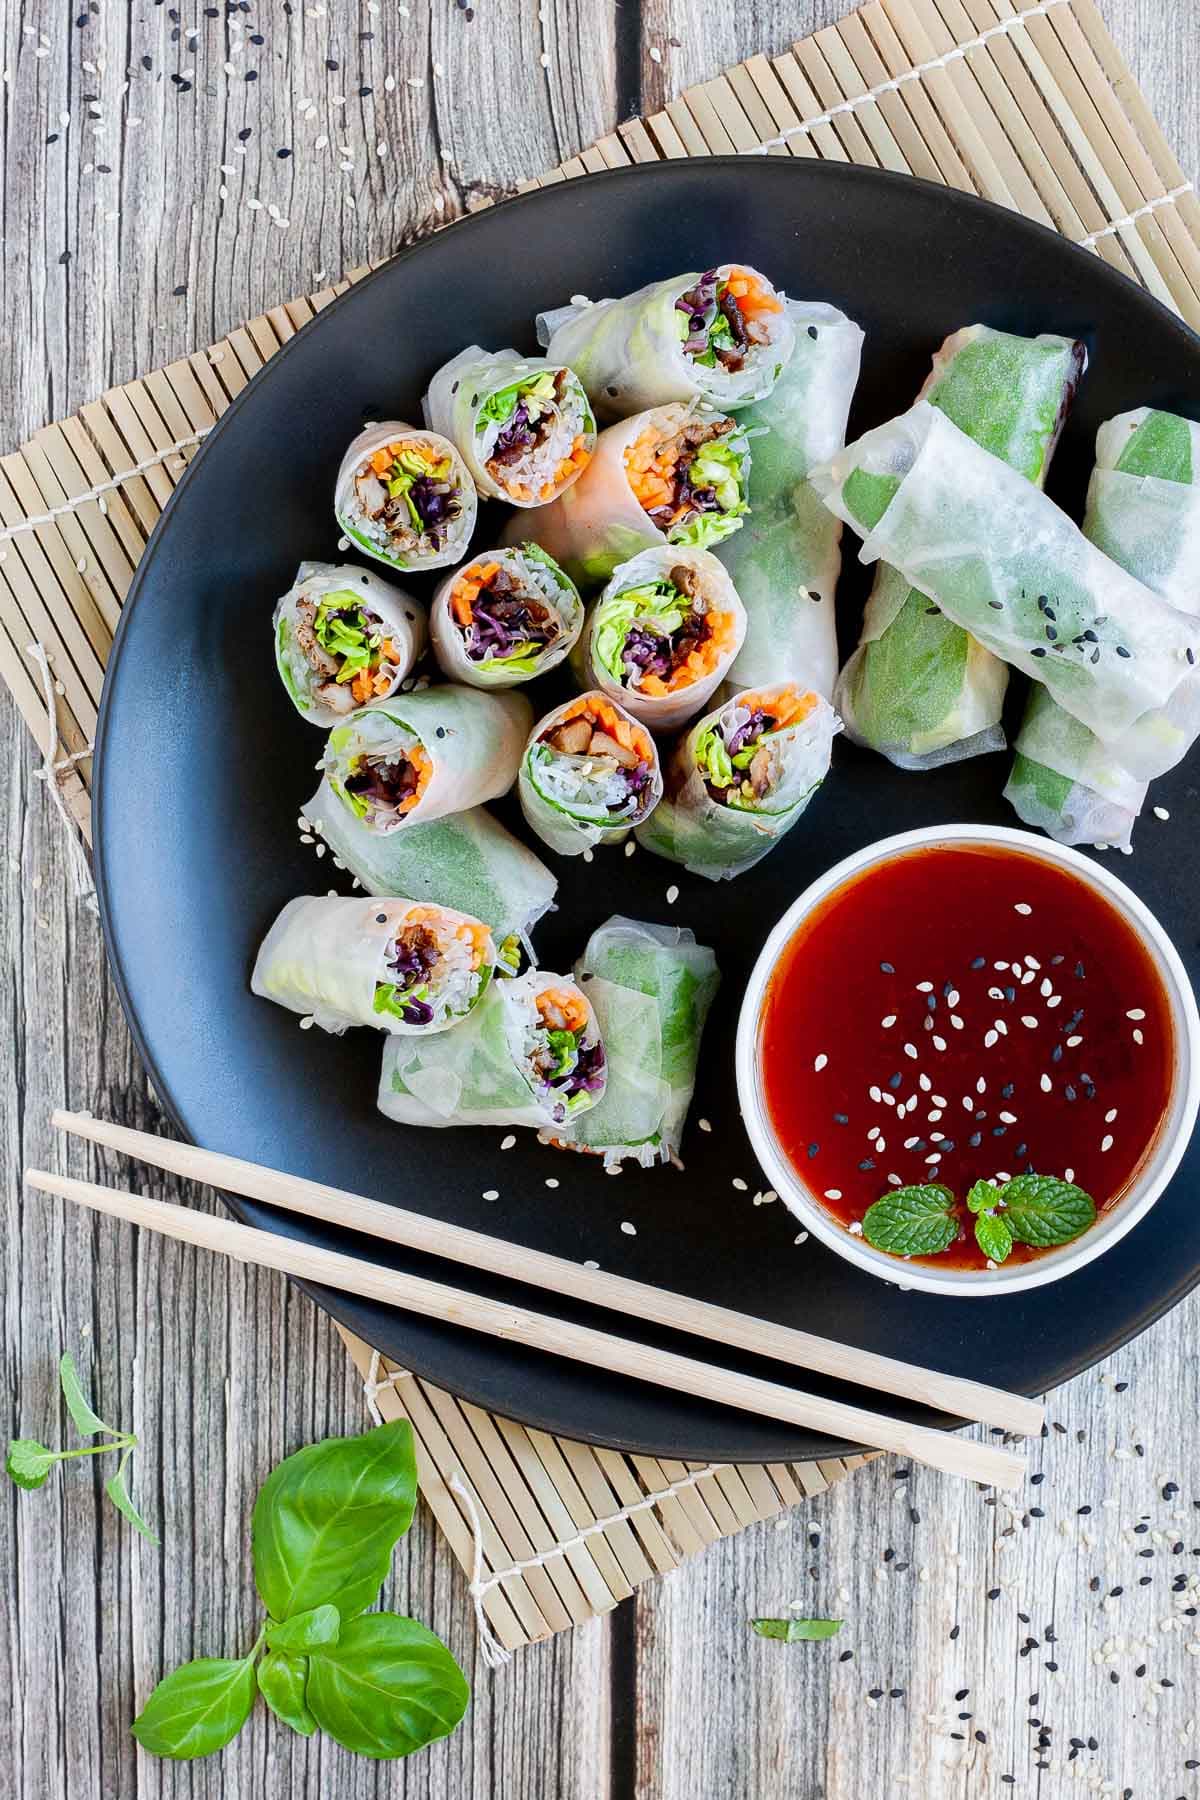 Opaque rice paper rolls filled with carrots, purple sprouts, thin glass. noodles and brown mushrooms are served on a large black plate. Several rolls are cut half so you can see the filling. Red sauce in a small white bowl is served next to it.